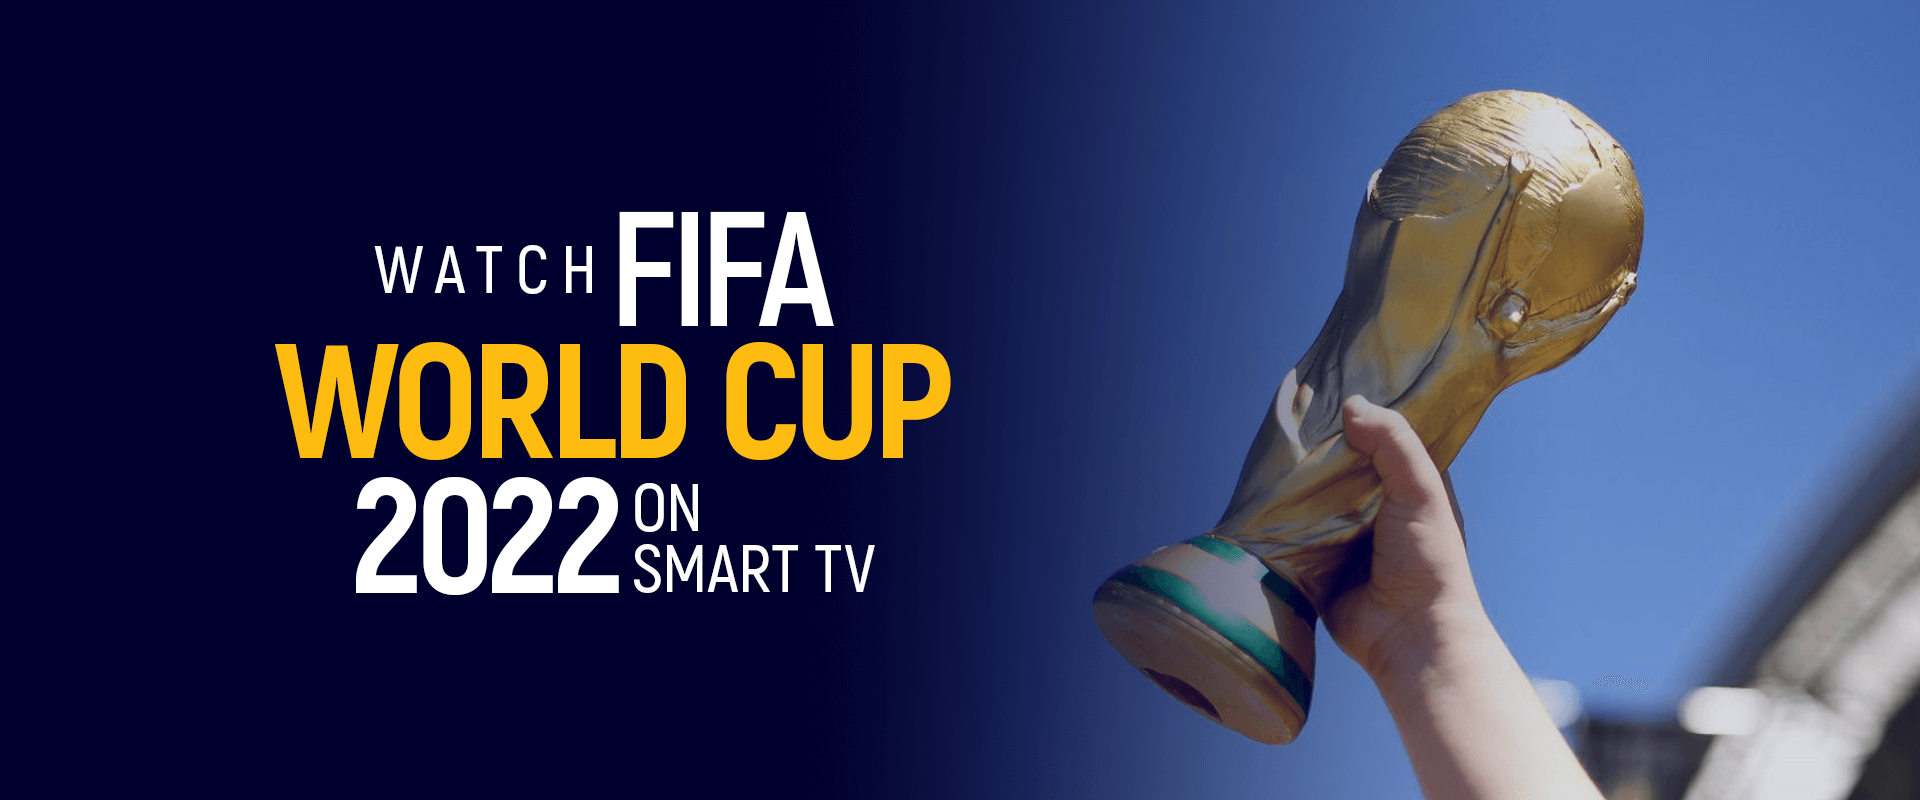 world cup 2022 tv channel